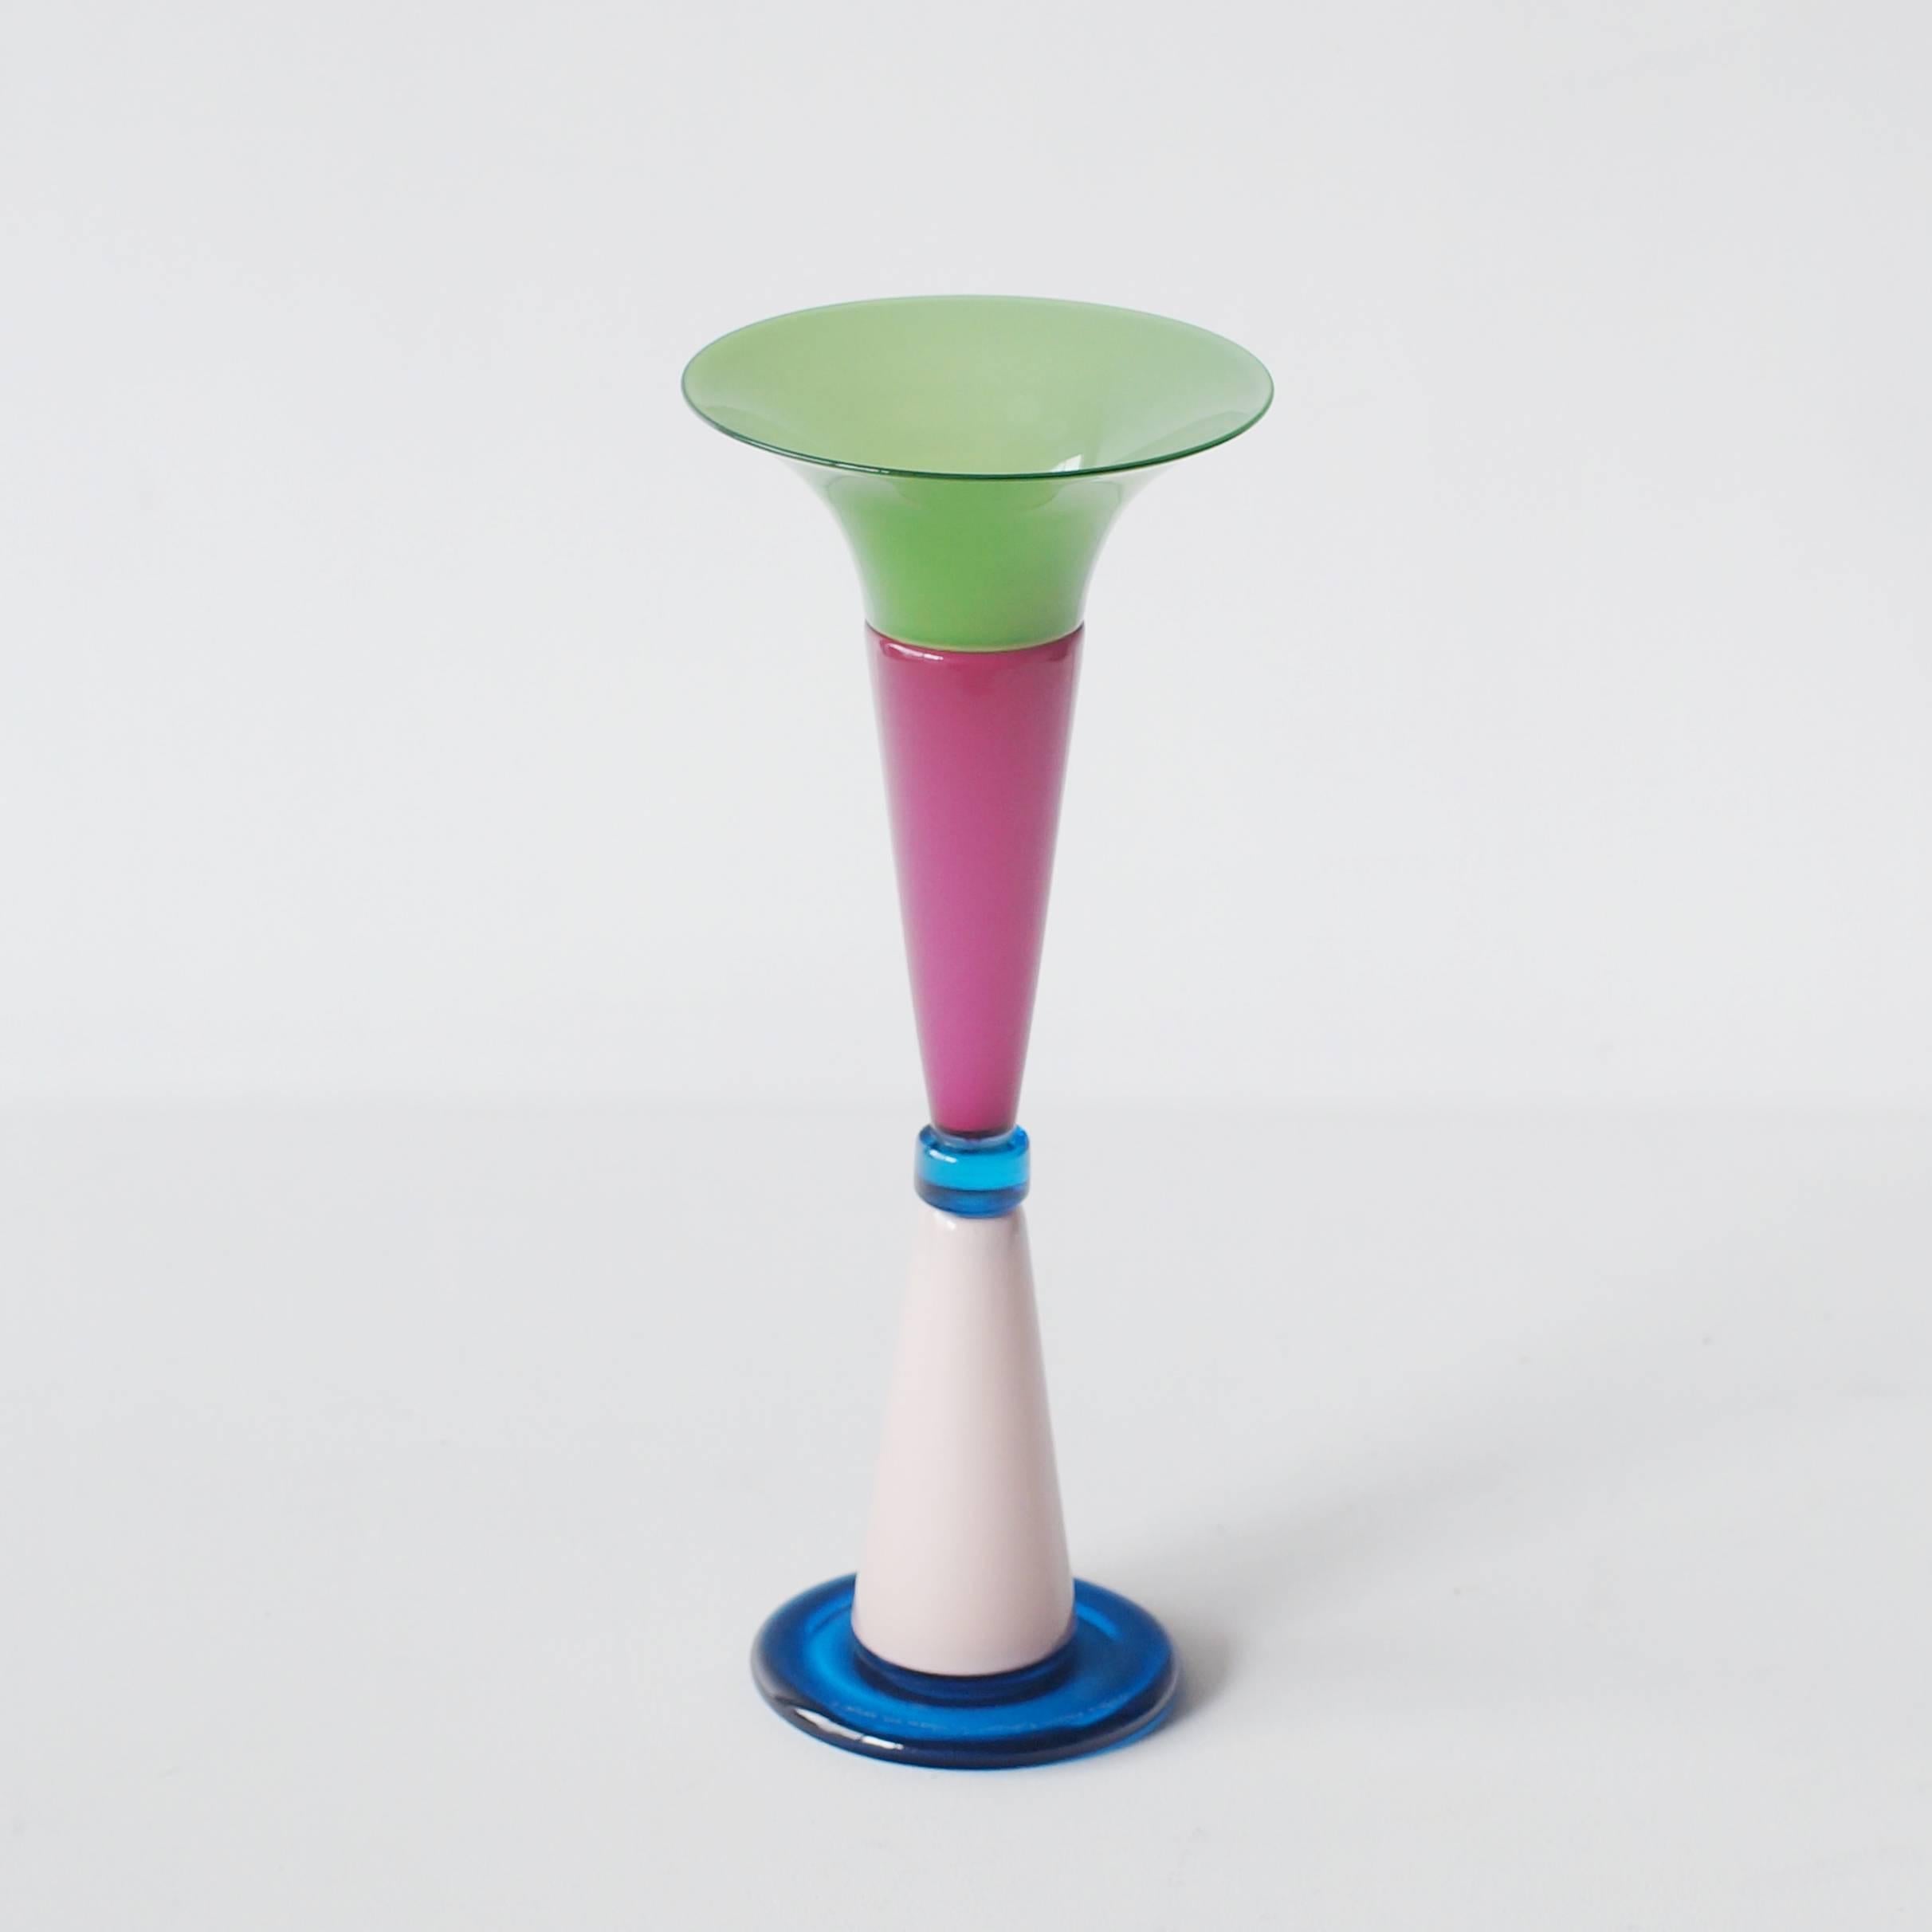 Pasifilla vase from Memphis Milano Vetri collection in 1986. 
Designed by Ettore Sottsass. Mark on the bottom tells 